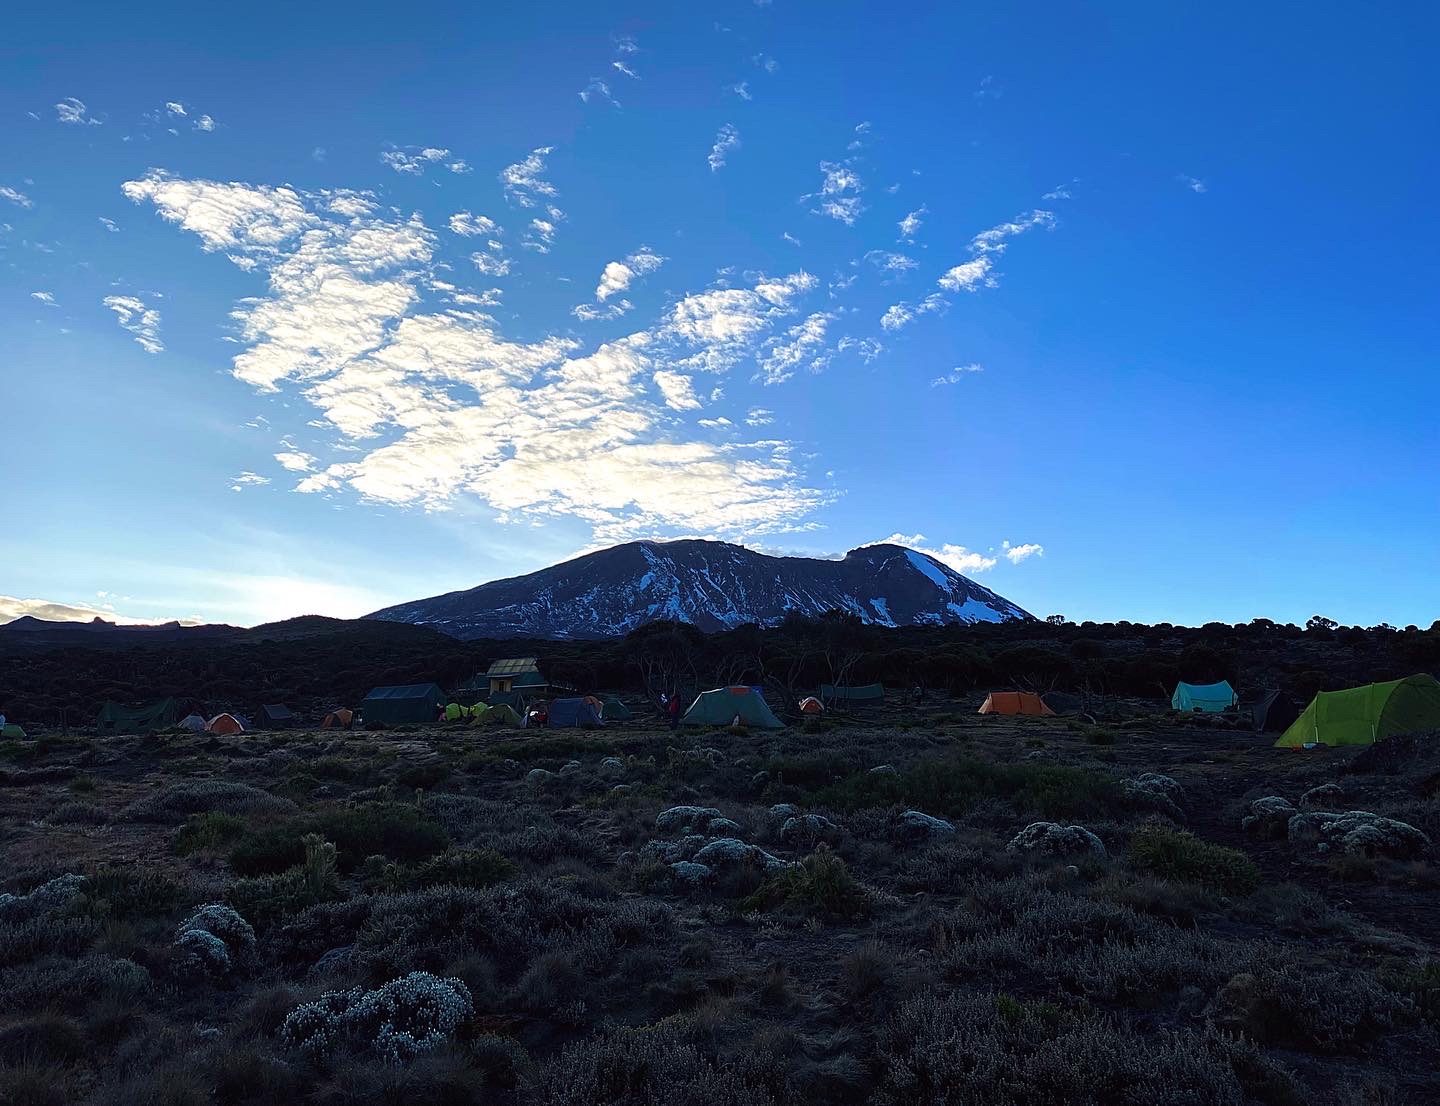 One of the campsites on Mt. Kilimanjaro with a view of the top 